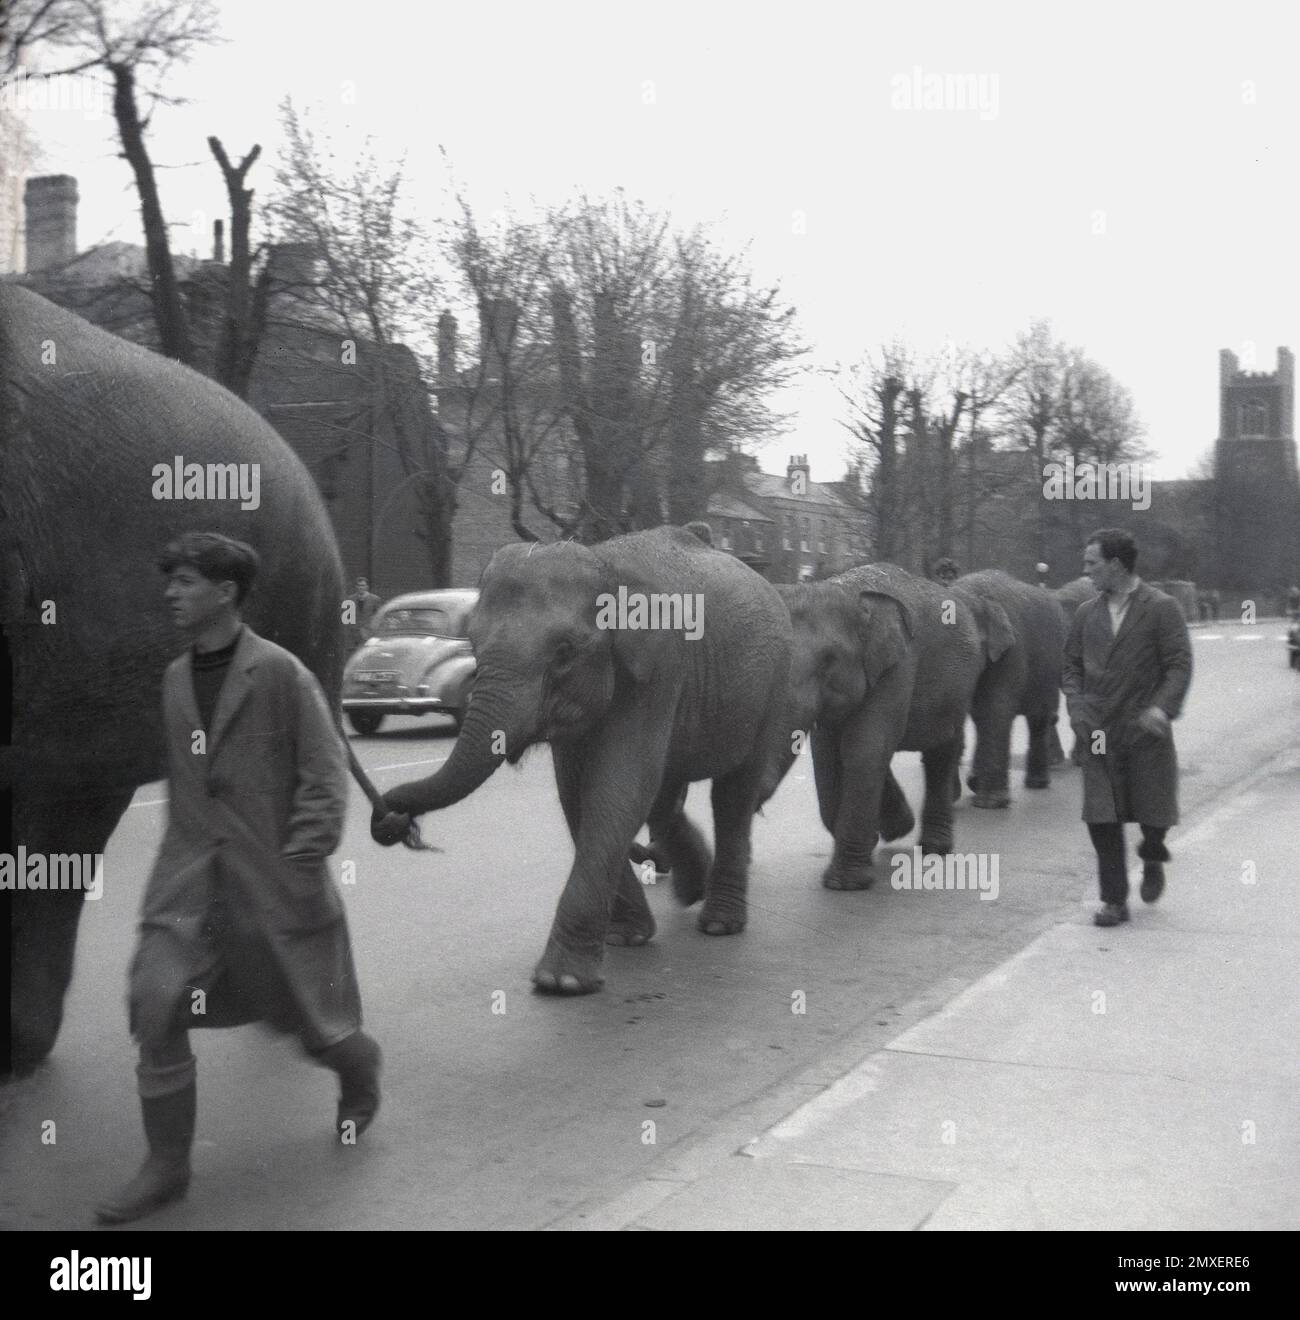 1955, historical, animal trainers leading a line of elephants on a road as the circus comes to town, the Bertam Mills Circus, Cambridge, England, UK. Started by Bertram W, Mills in 1921 with a production at London's Olympia, the Mill's circus show was quality entertainment attracting the great and the good, with famous people of the day attending, many being members of the British Royal Family.  Bertram W, died in 1938 but his two sons, Cyril and Bernard took over and performances continued until 1967, when rising costs forced its closure. Stock Photo